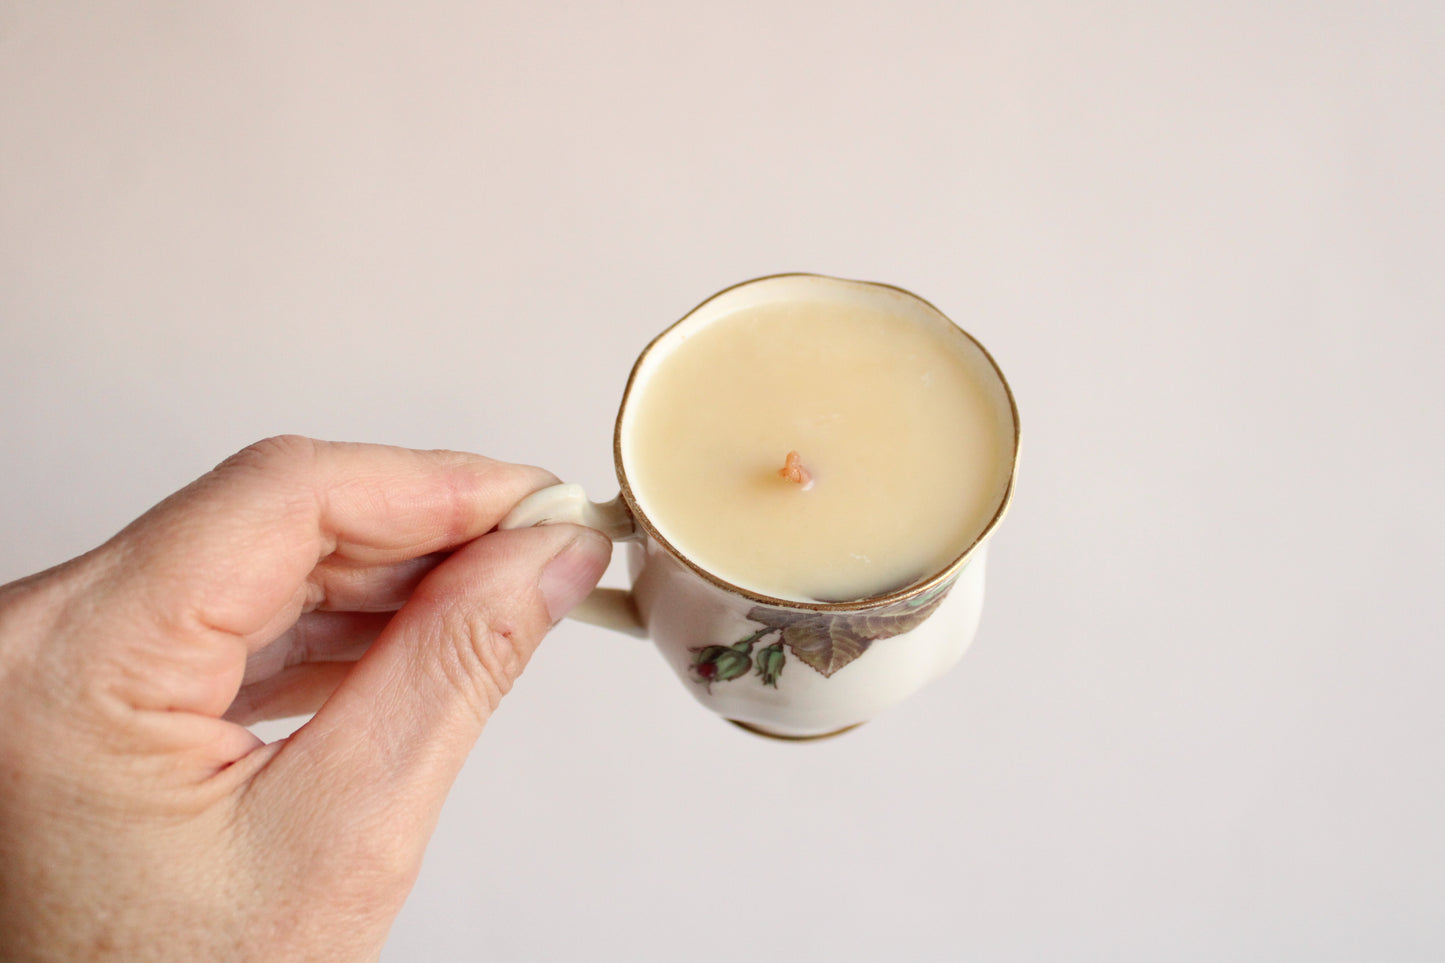 Handpoured Soy Wax Candle in A Royal Standard English Rose Tea Cup and Saucer